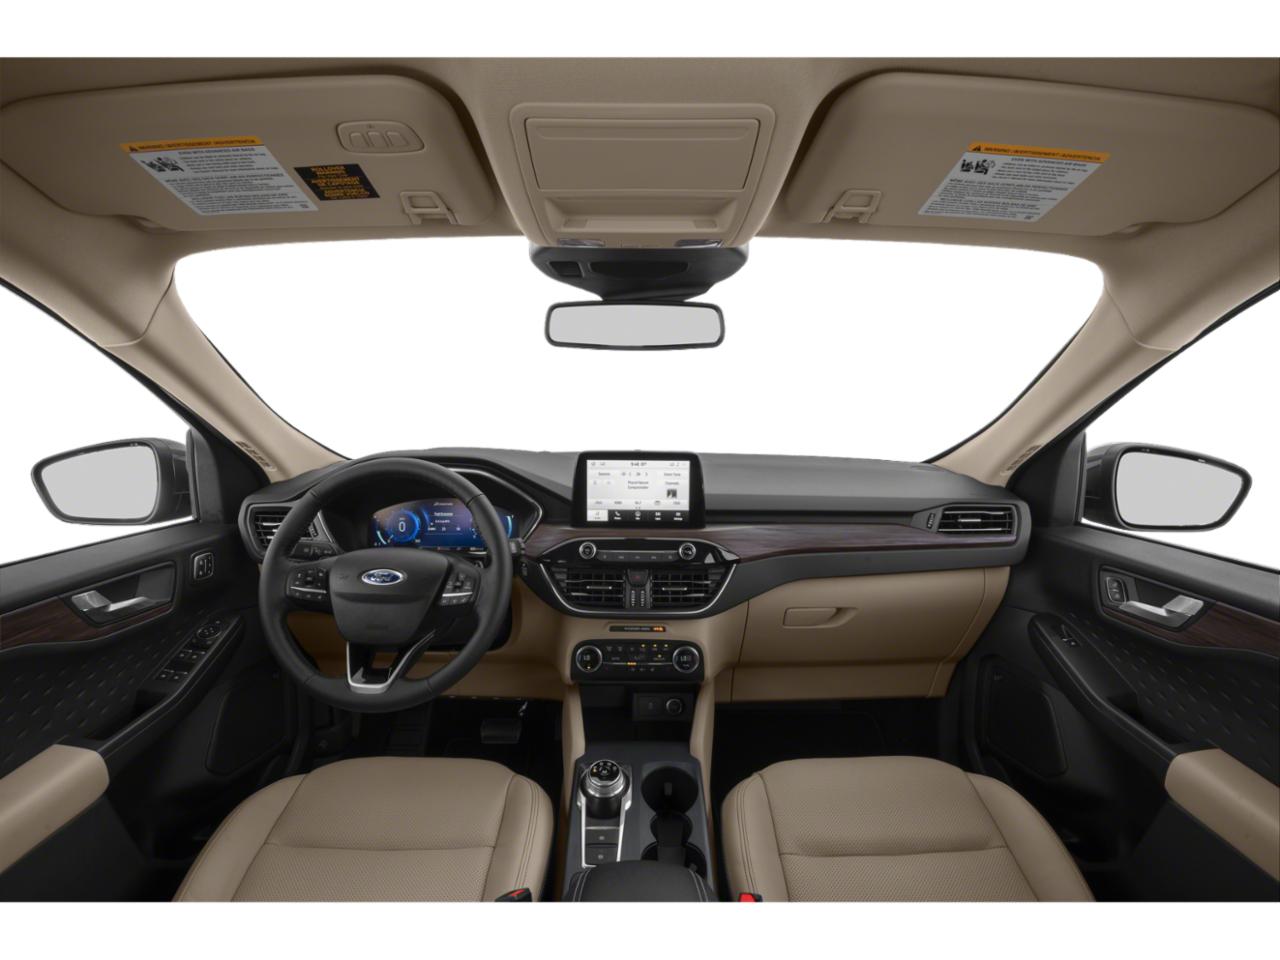 2022 Ford Escape Vehicle Photo in Plainfield, IL 60586